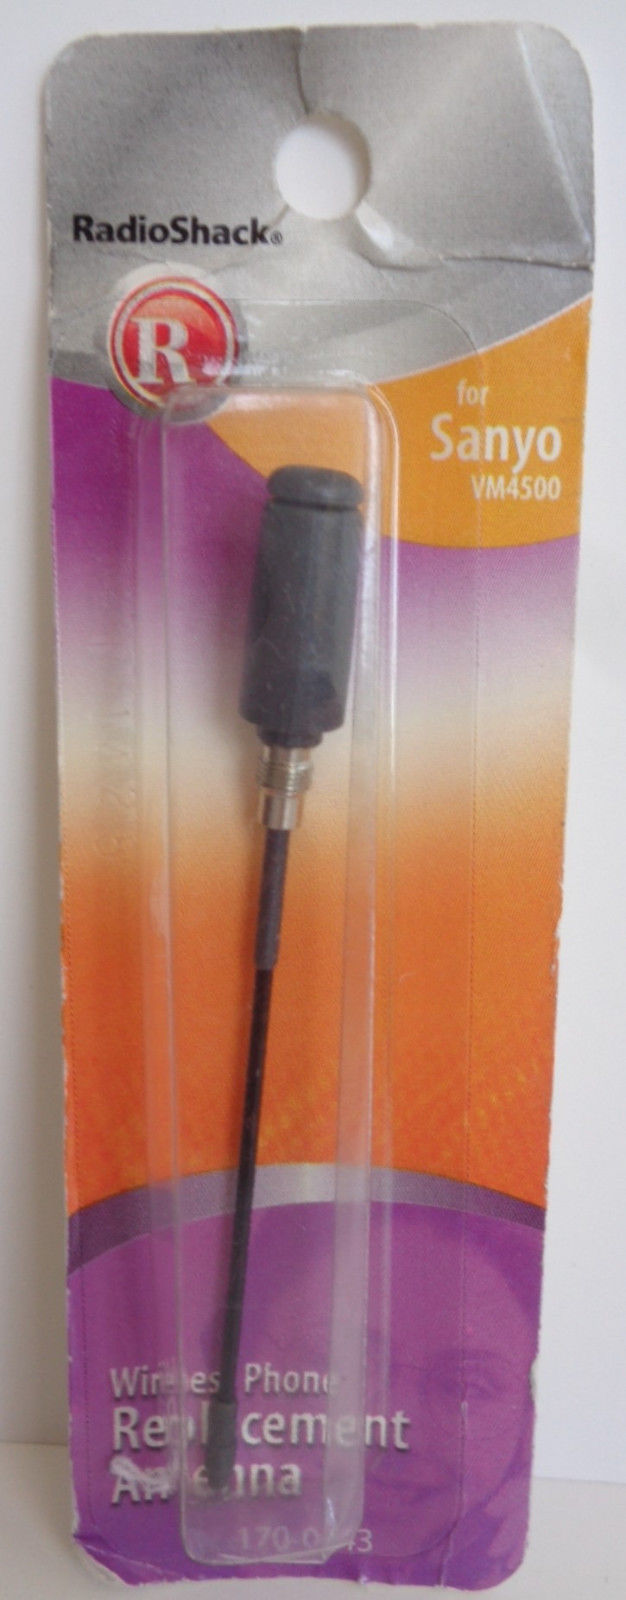 Radio Shack Wireless Phone Replacement Antenna 170-0943 for Sanyo VM4500 NOS